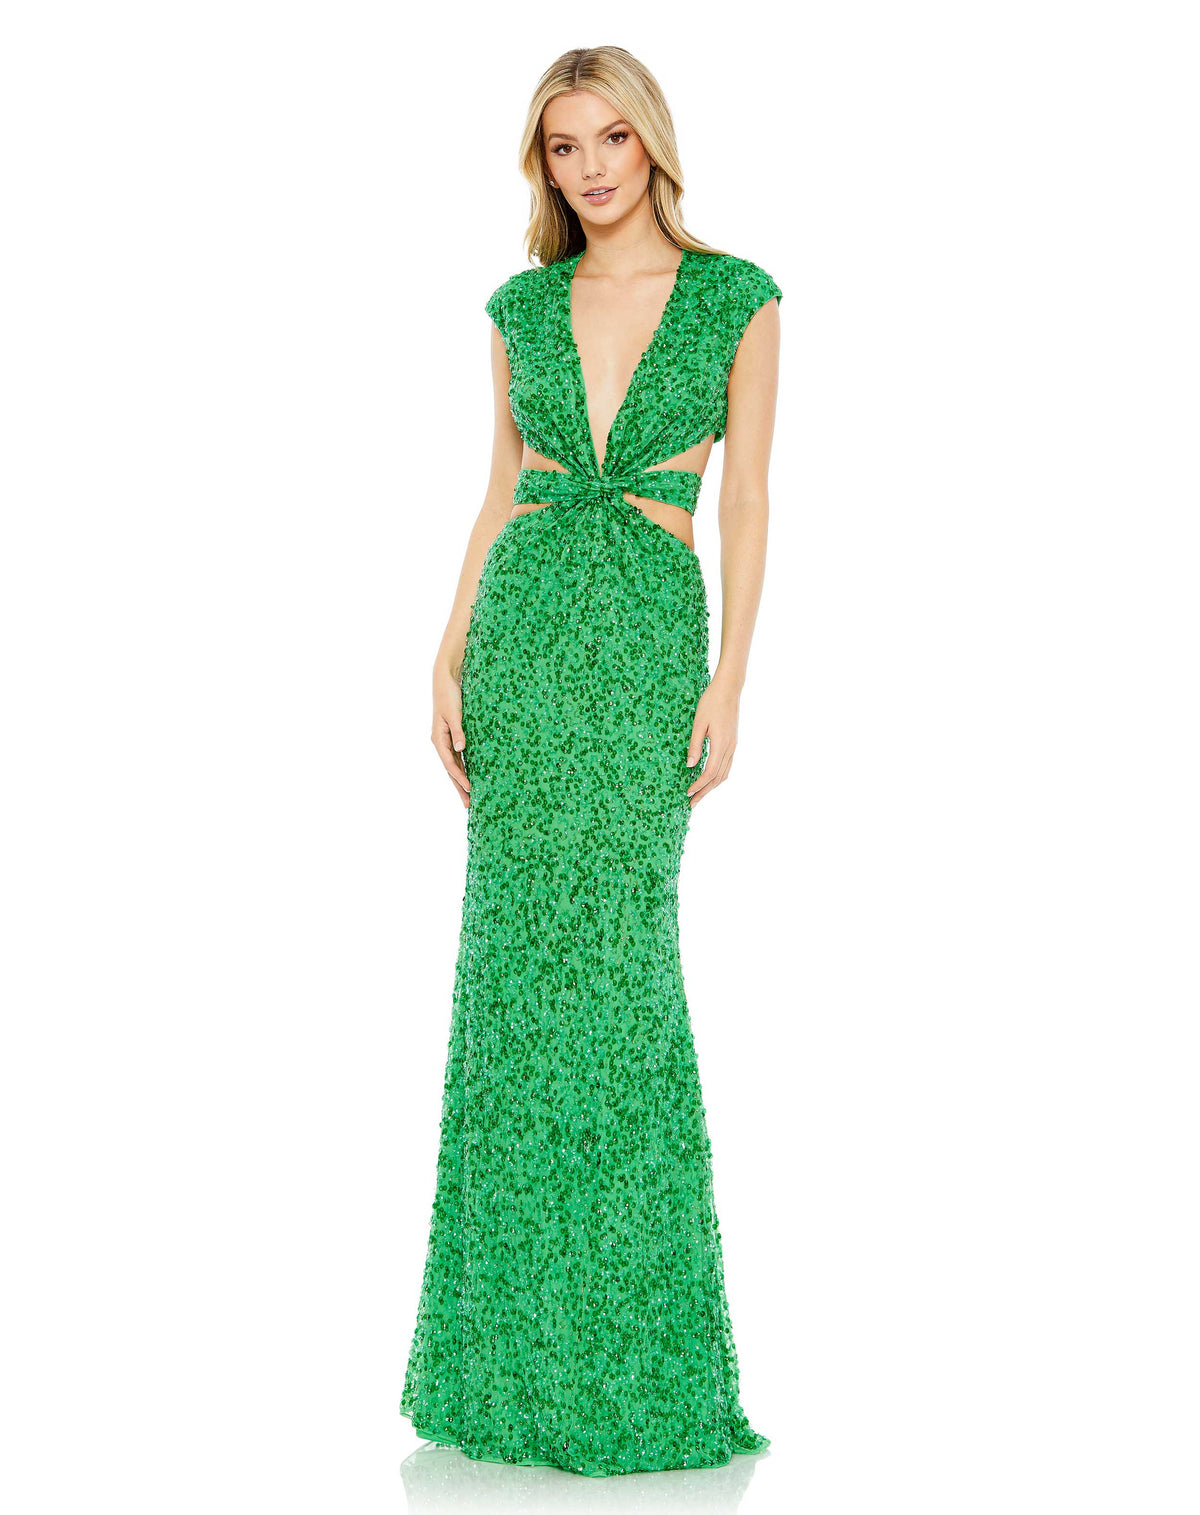 This hot, Mac Duggal, floor-length, sequinned spring green, evening gown is a super-sexy, black-tie dress for that special occasion! With a plunging V neck, sexy cut-out detail and a floor-length finish, this sequin dress in this striking colour is perfect for Summery special occasions and events! 